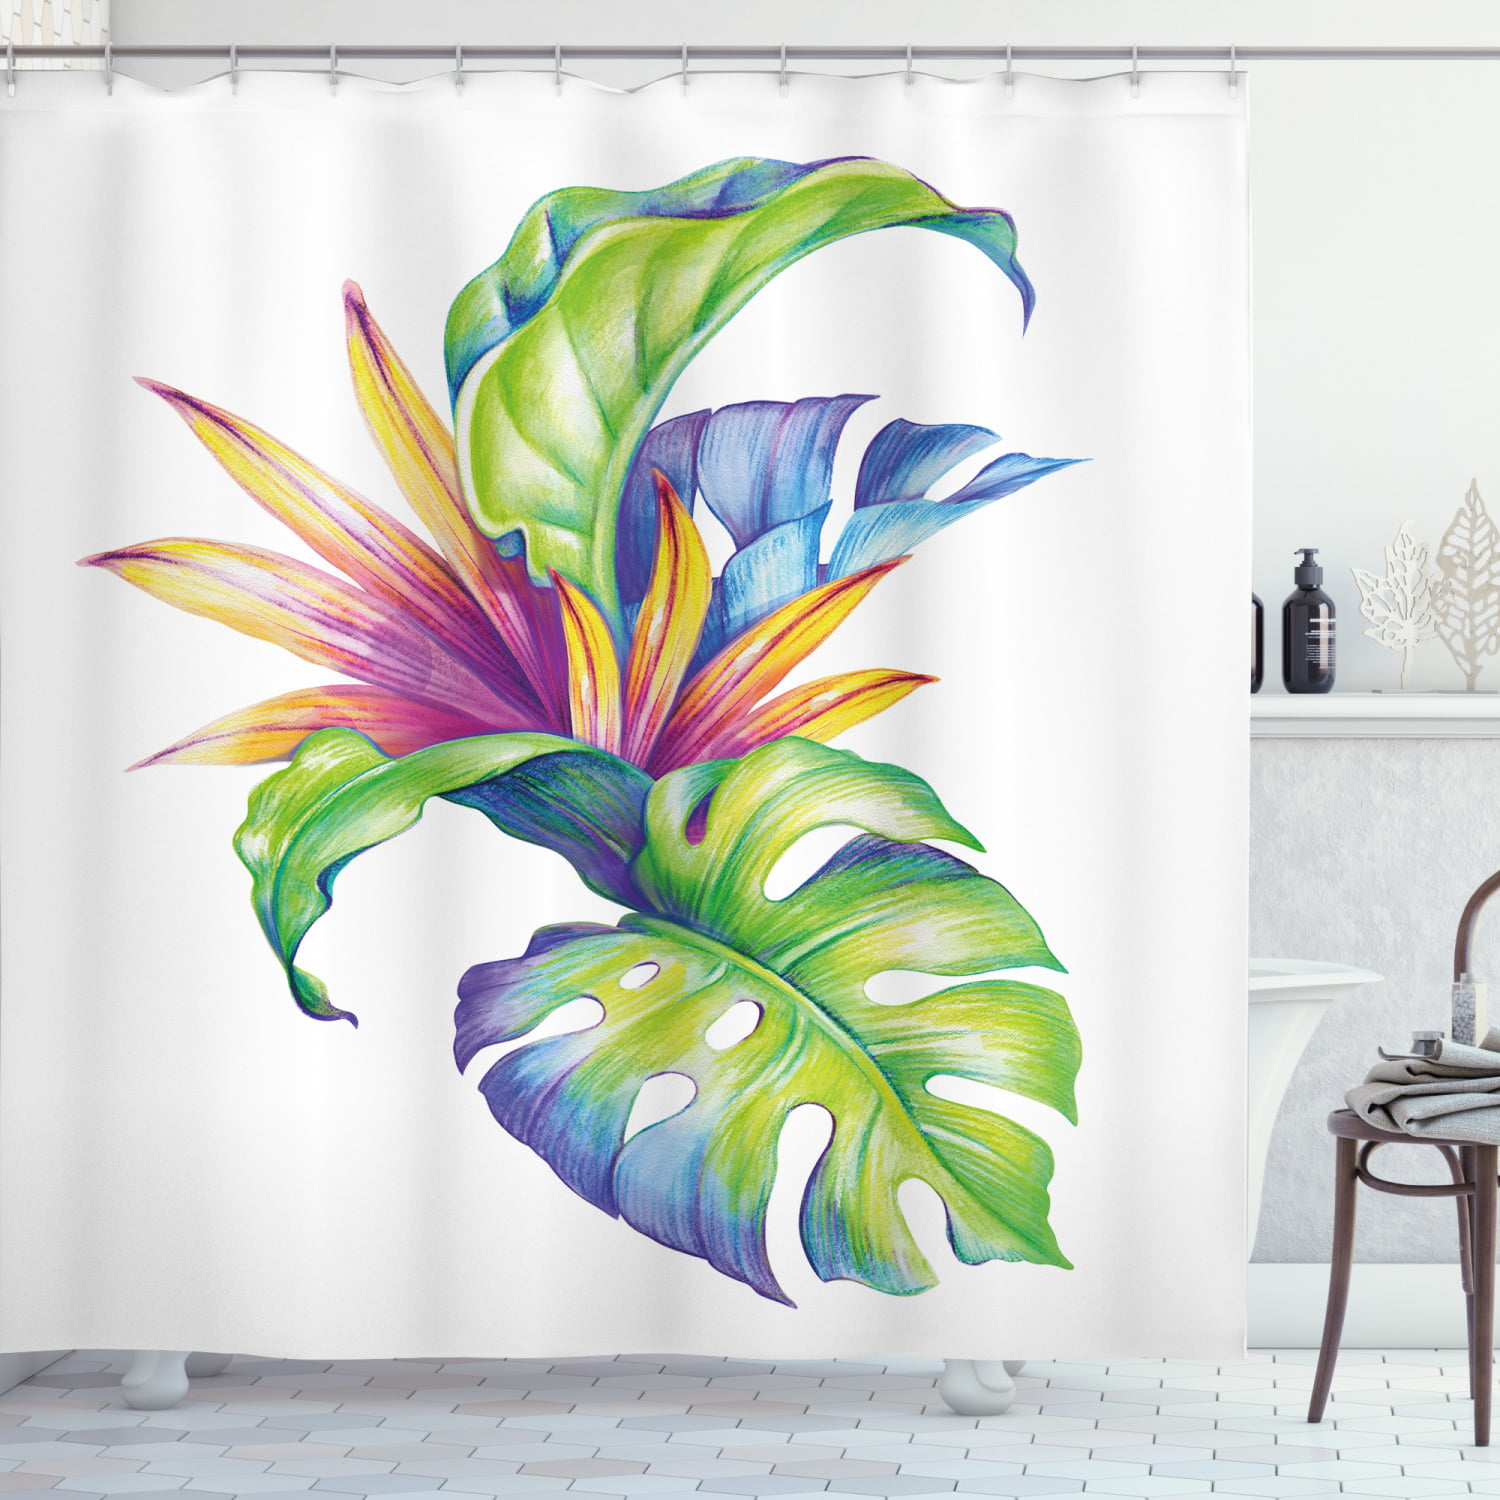 Tropical Leaves Waterproof Polyester Bathroom Shower Curtain With Free 12 Hooks